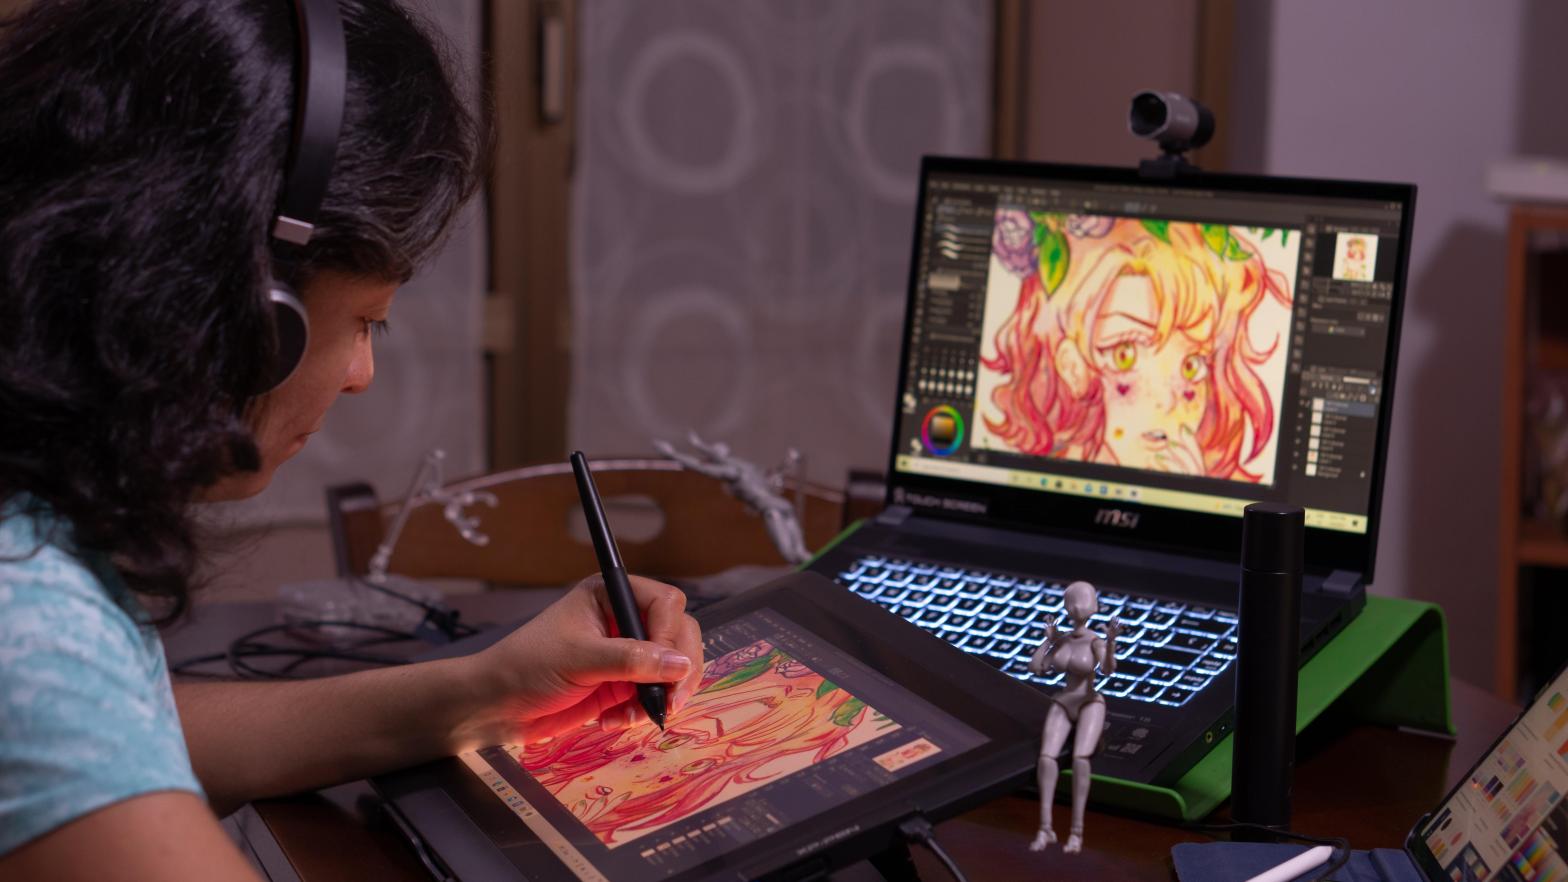 Digital artists have quite a few art and photo programs to choose from, but one of the most-widely used, other than Adobe Photoshop, is Clip Studio Paint. (Photo: MarbellaStudio, Shutterstock)